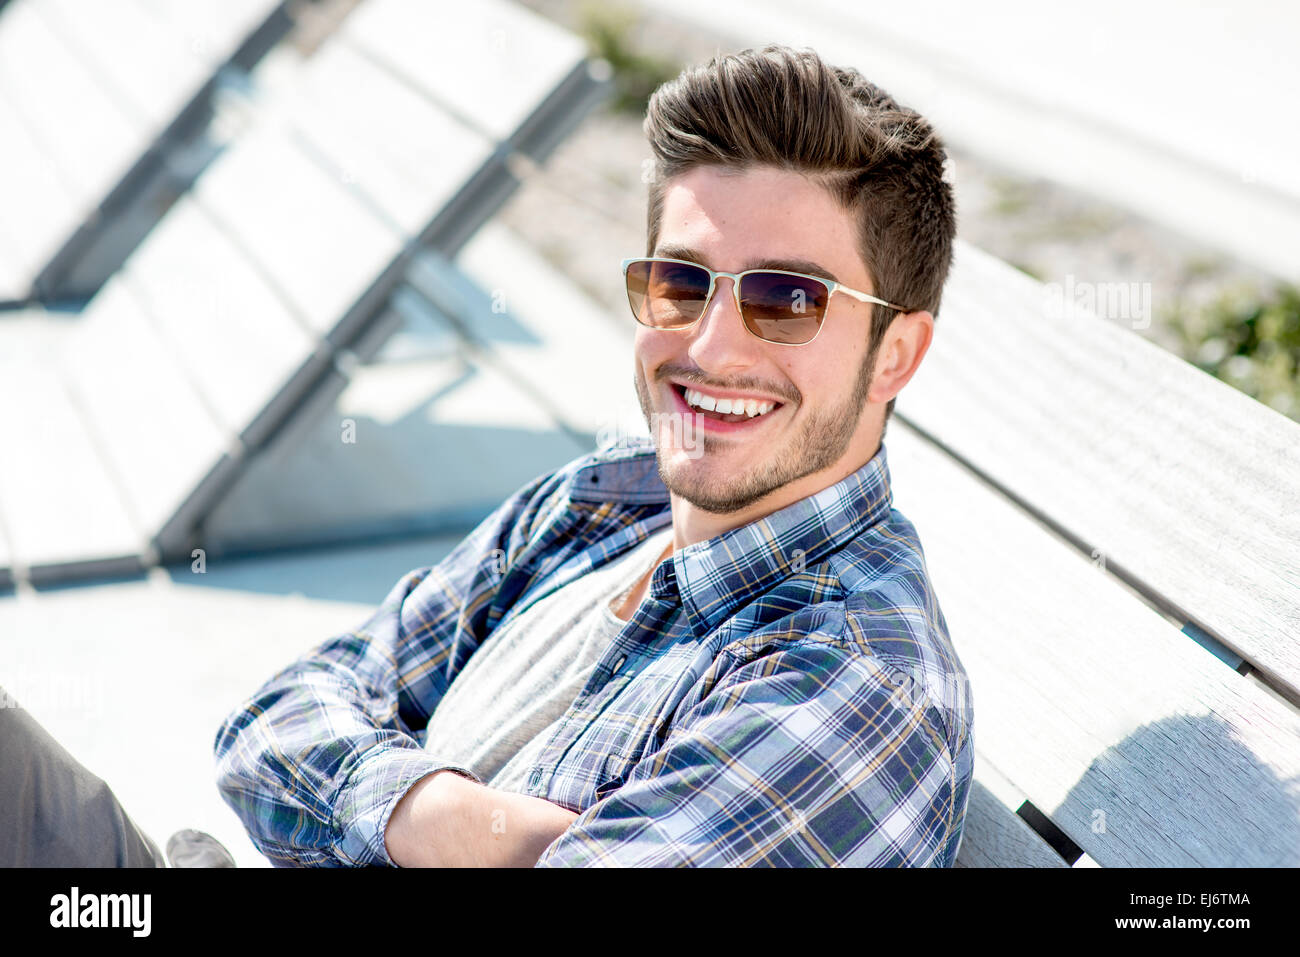 Portrait of a young handsome man outdoor Stock Photo